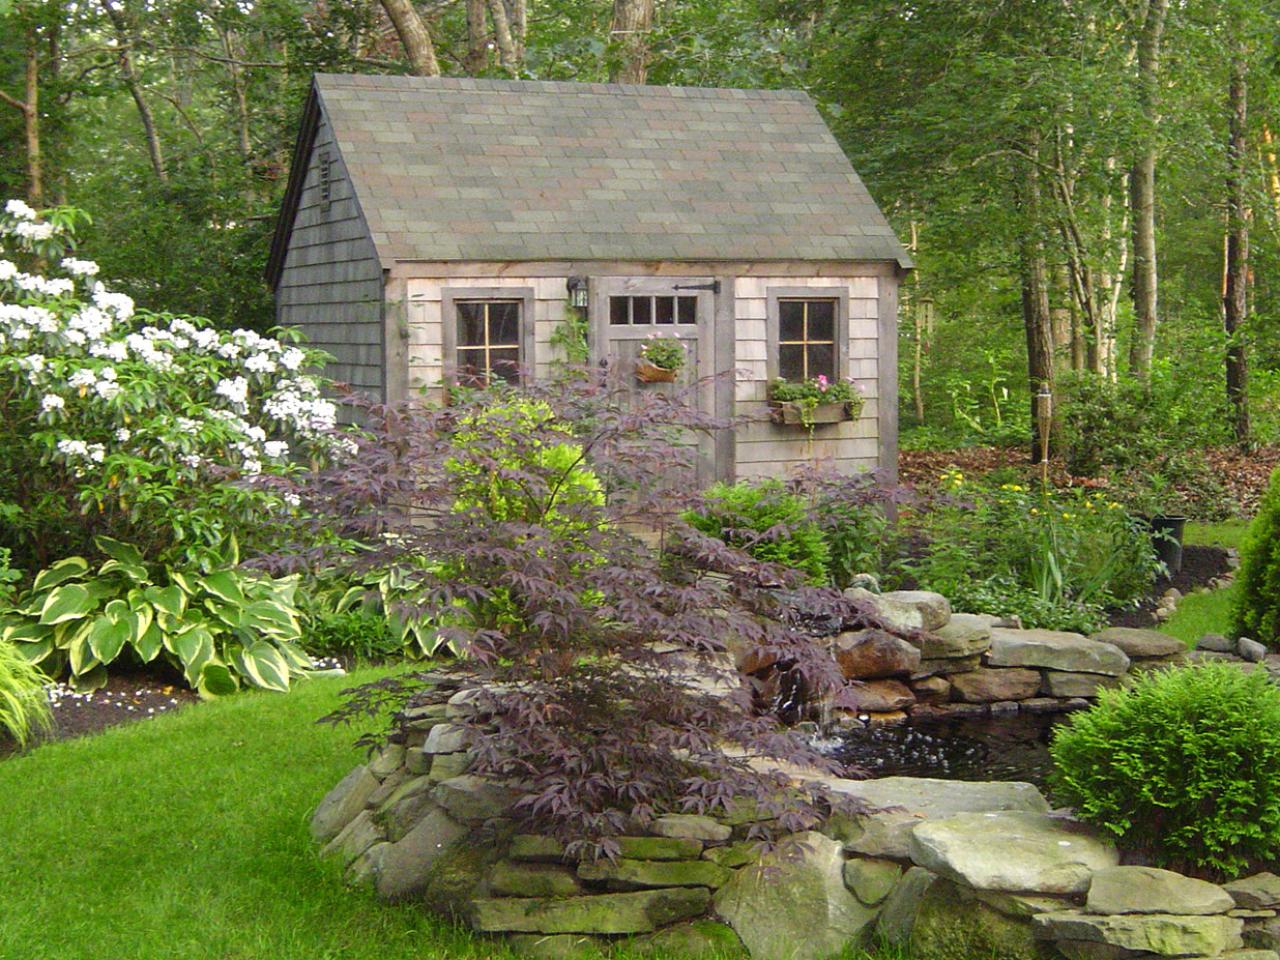 Fairytale-garden-shed-in-an-obscured-place